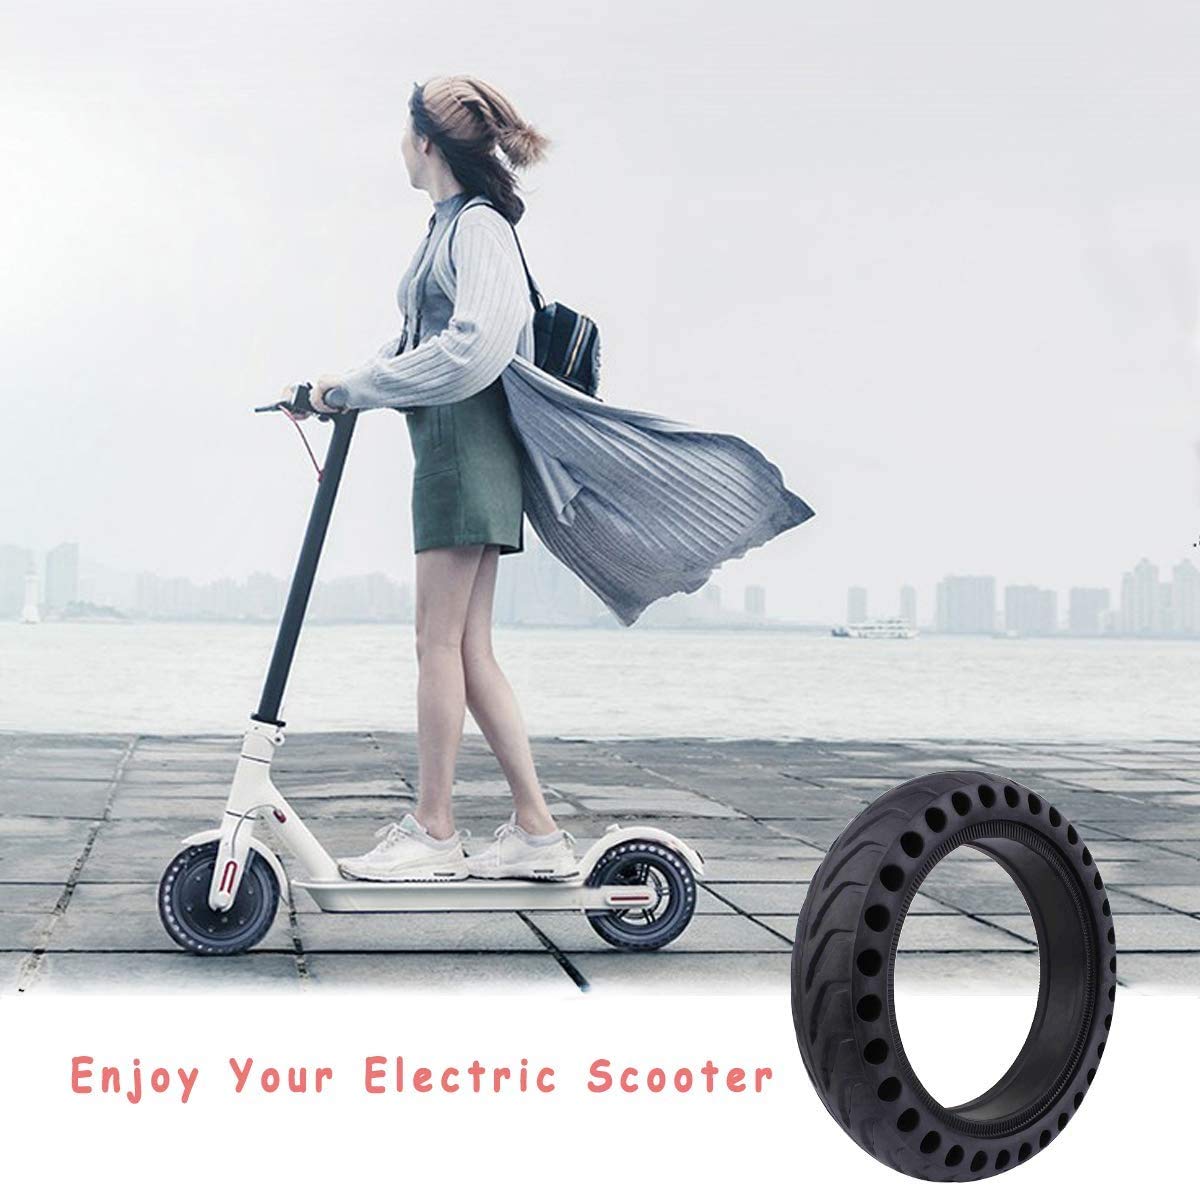 Rilishidai Scooter Tire Replacement for Electric Scooter for Xiao-mi Mi m365 / gotrax gxl V2,8.5 inches Solid Tires Explosion-Proof Tire for Xiaomi Mijia M365 Scooter【One Piece】 - Opticdeals